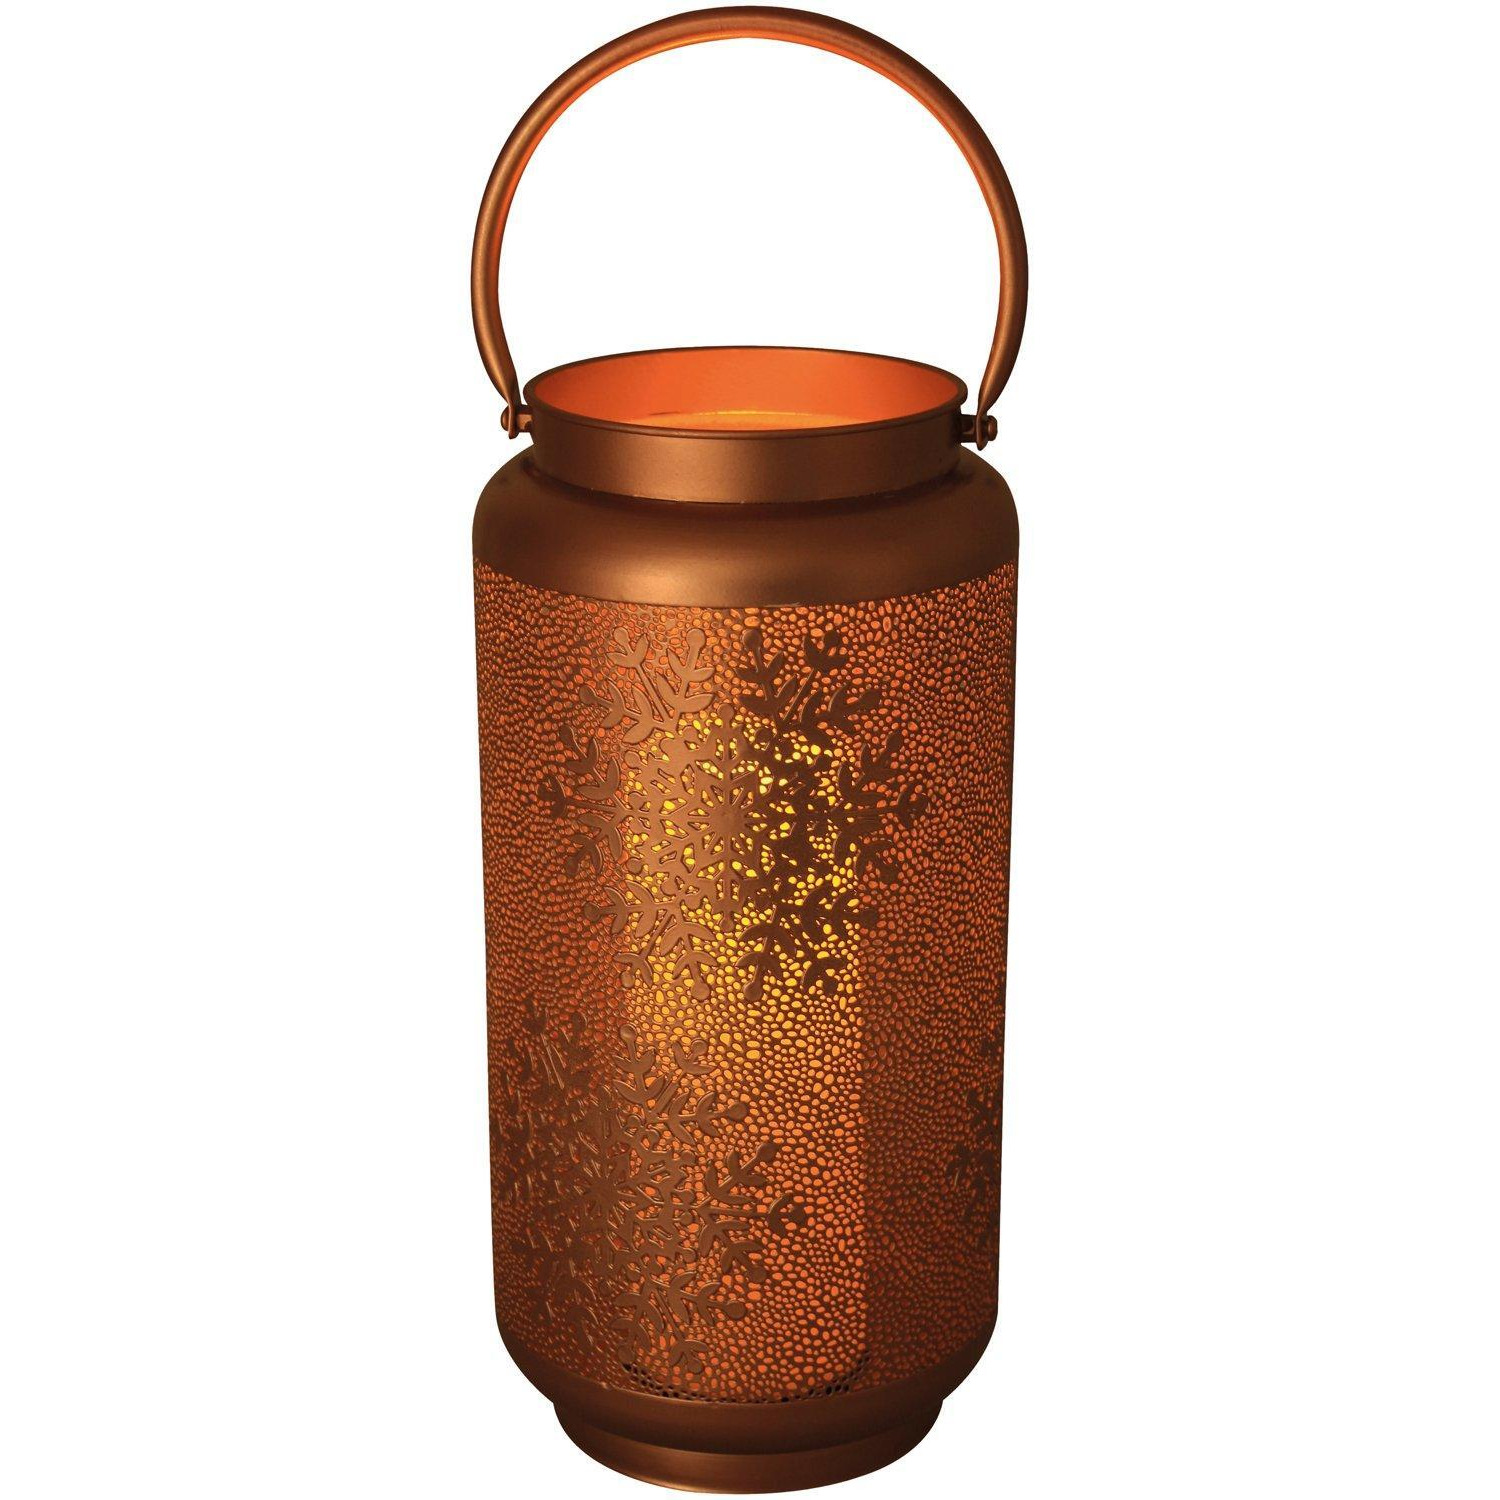 Battery Golden Lantern with Snowflakes Design - image 1